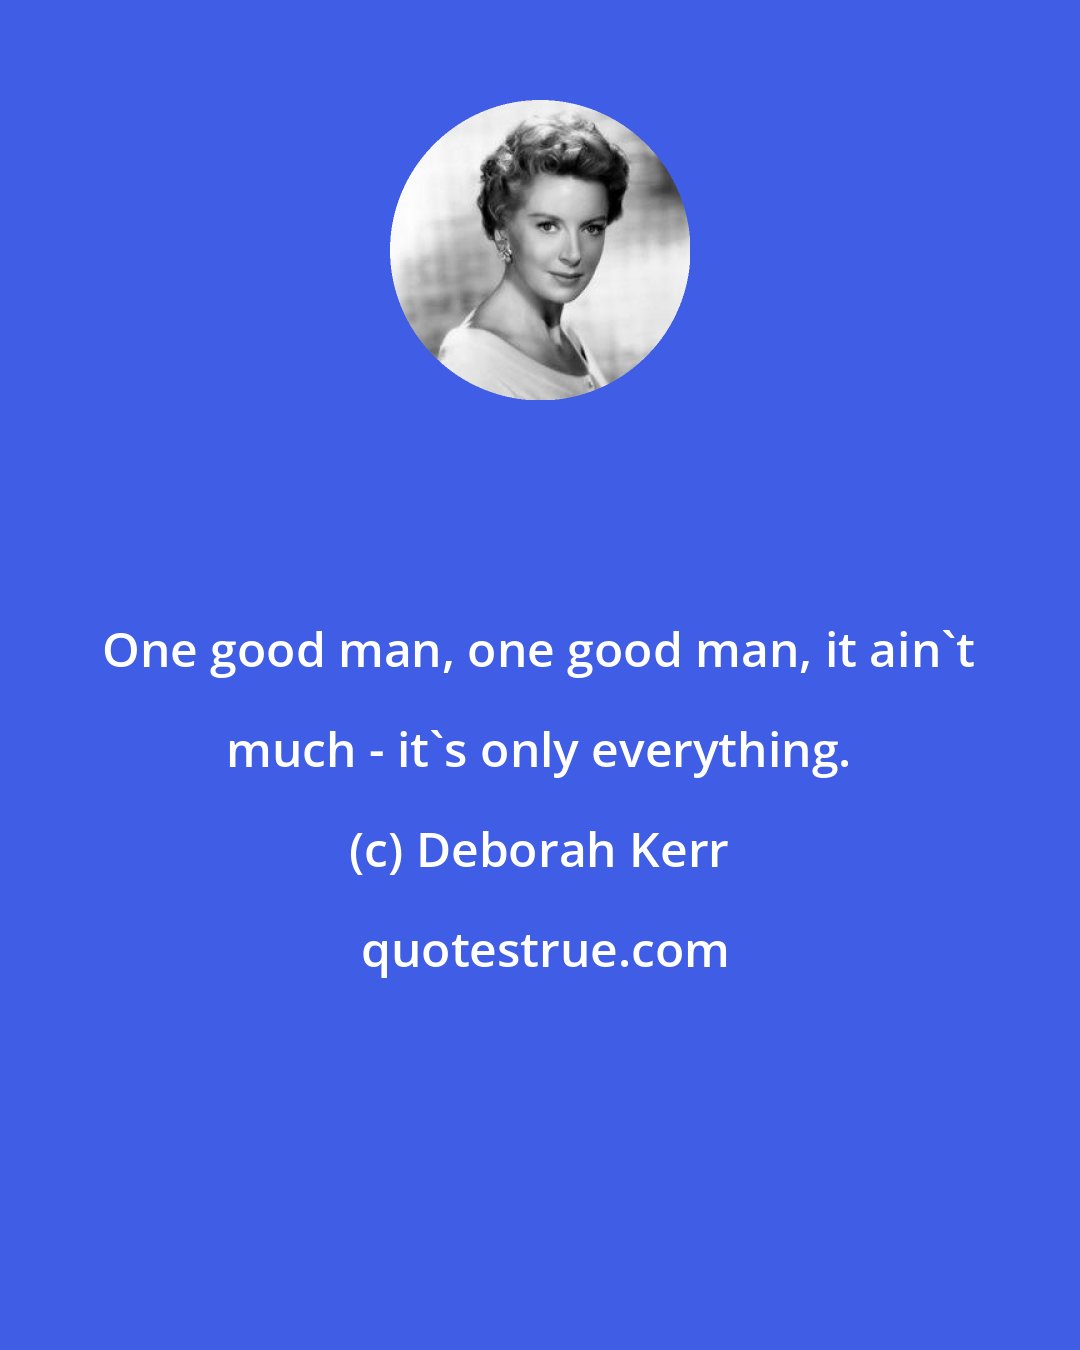 Deborah Kerr: One good man, one good man, it ain't much - it's only everything.